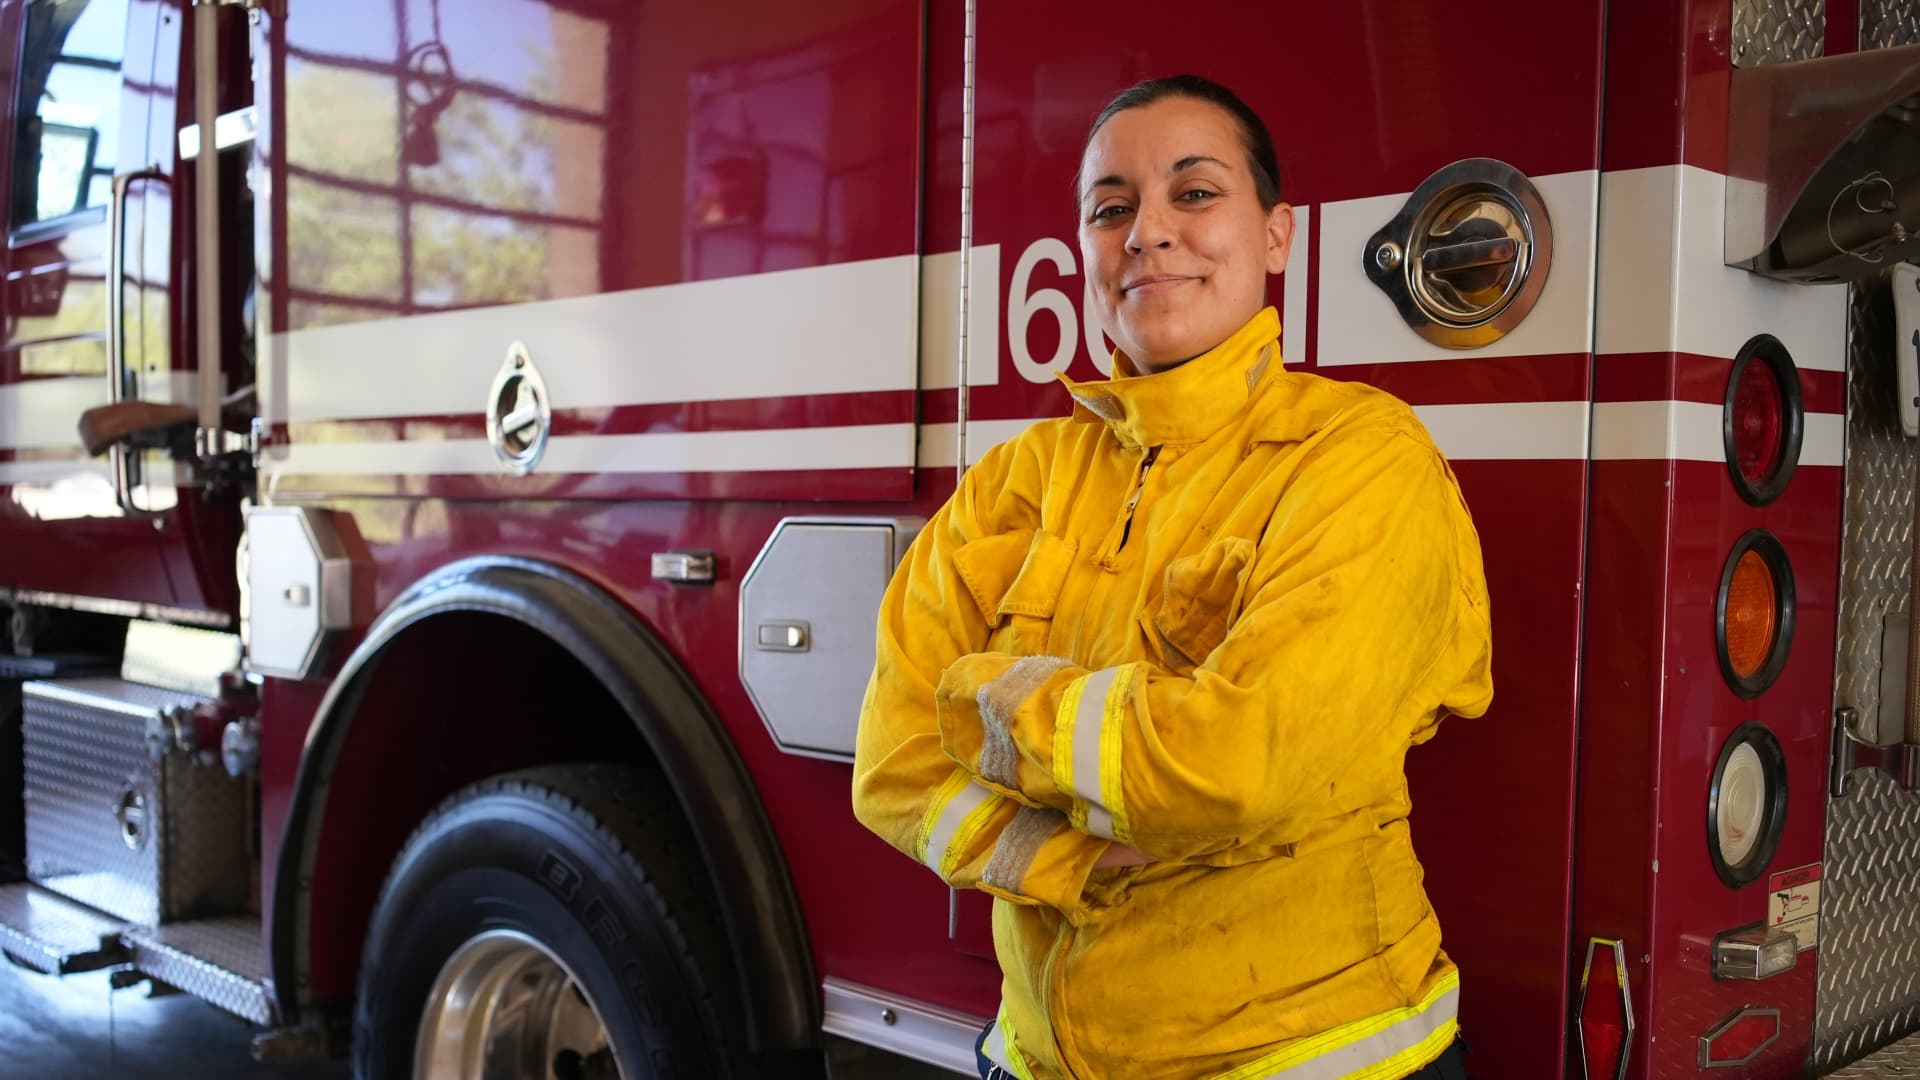 This 36-year-old left her $116,000 per year law job and now earns $15 an hour as a firefighter: Find something that makes you feel vibrant